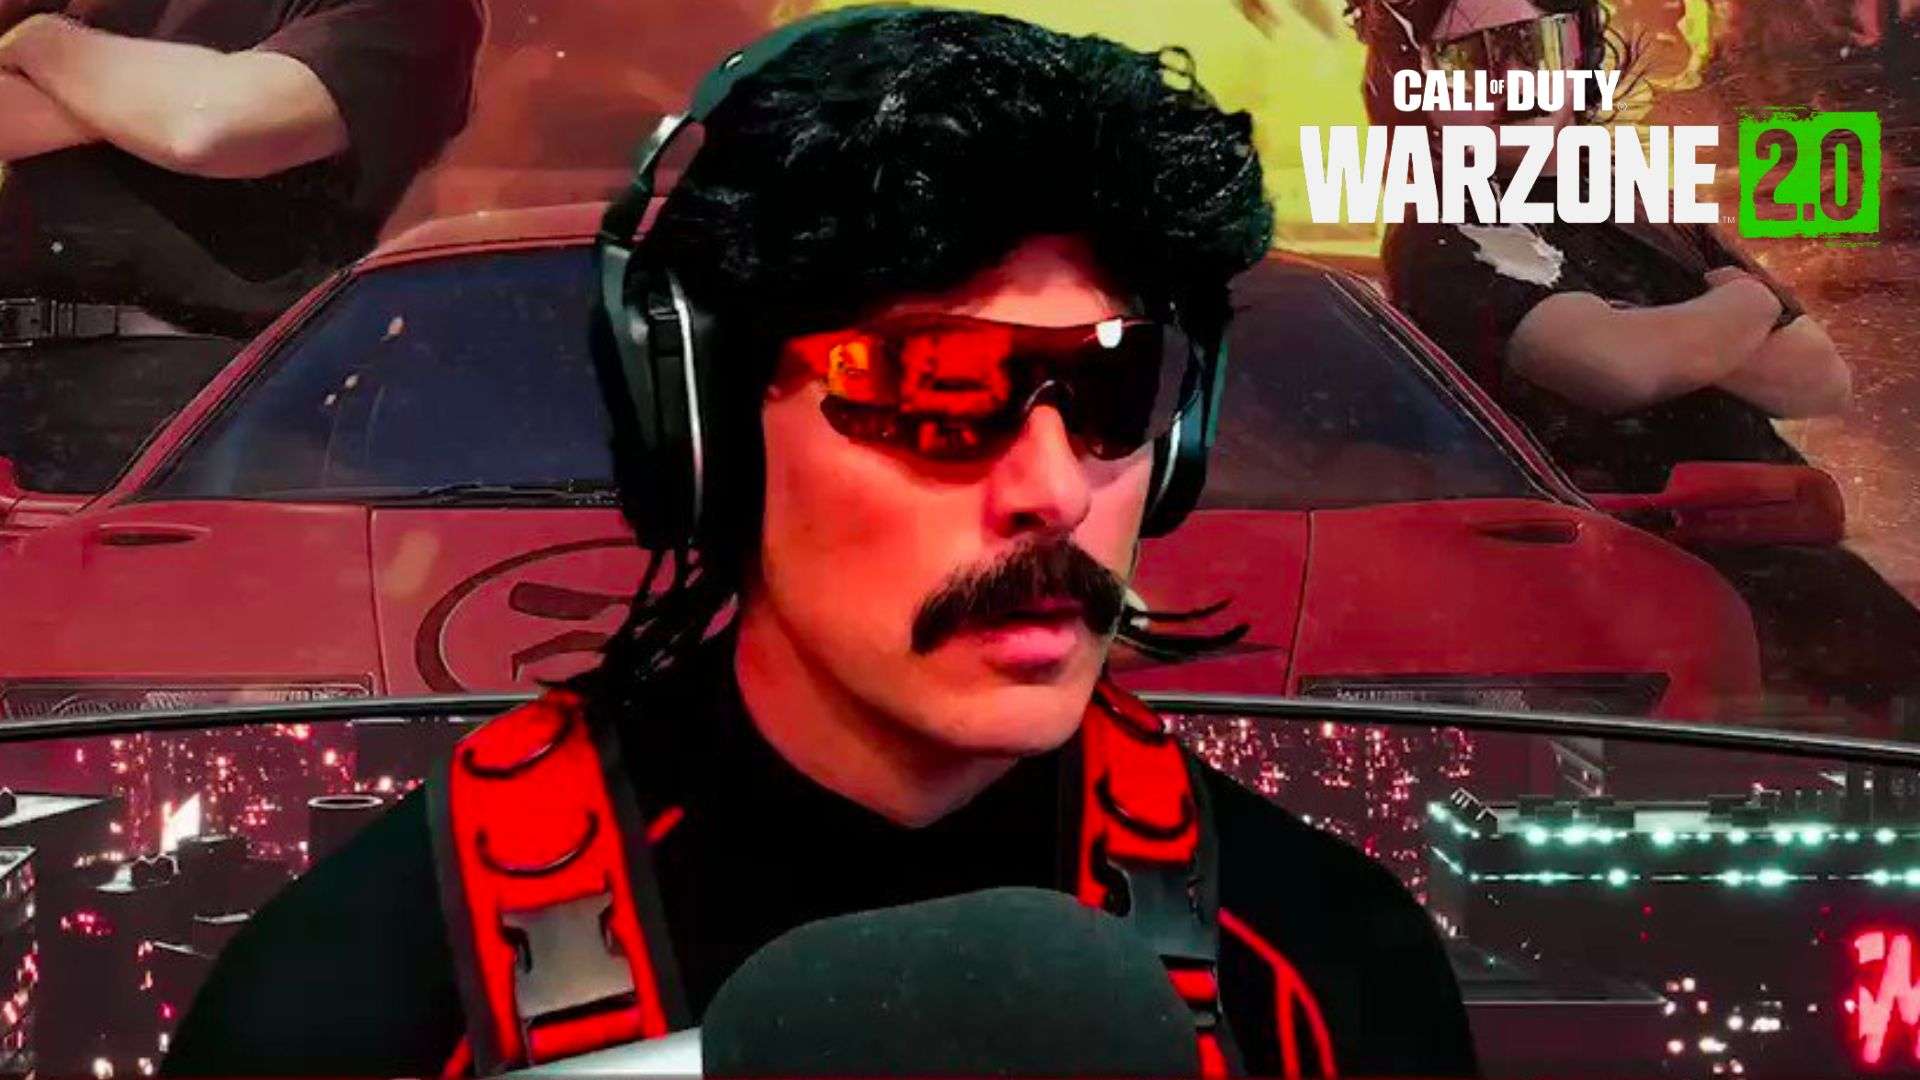 Dr Disrespect sat in front of YouTube video with car and Warzone 2 logo